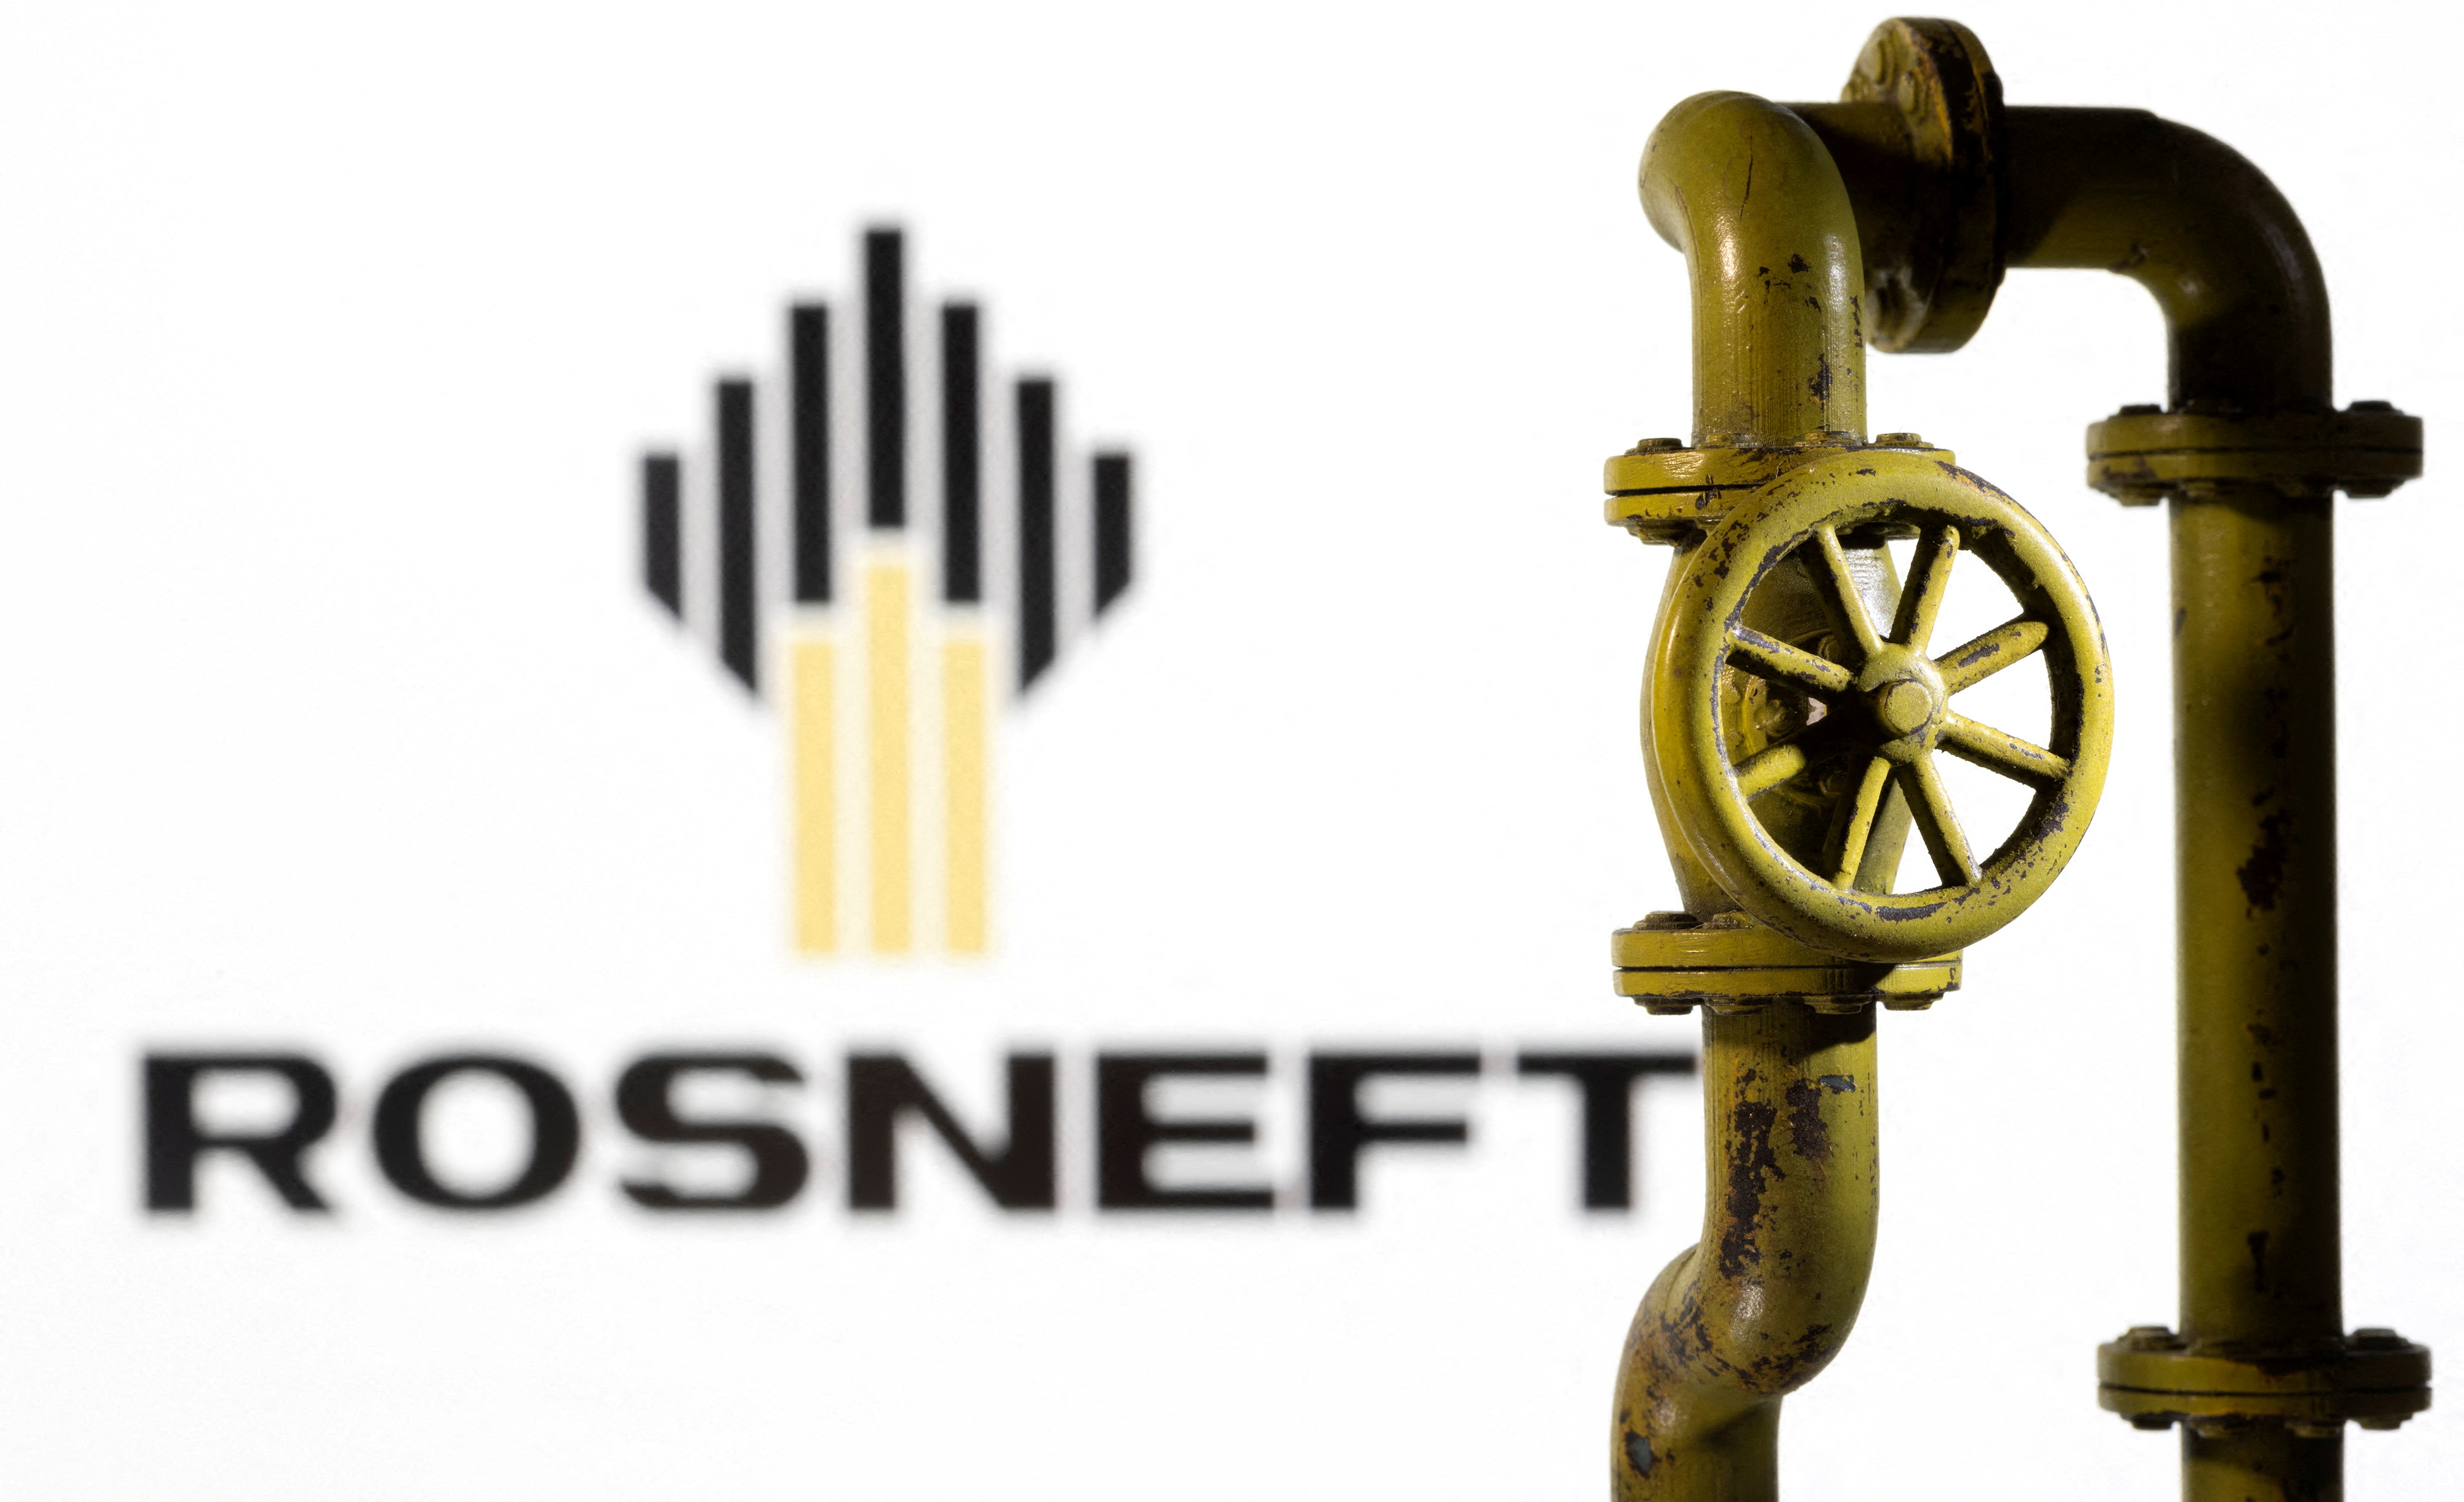 Illustration shows Rosneft logo and natural gas pipeline